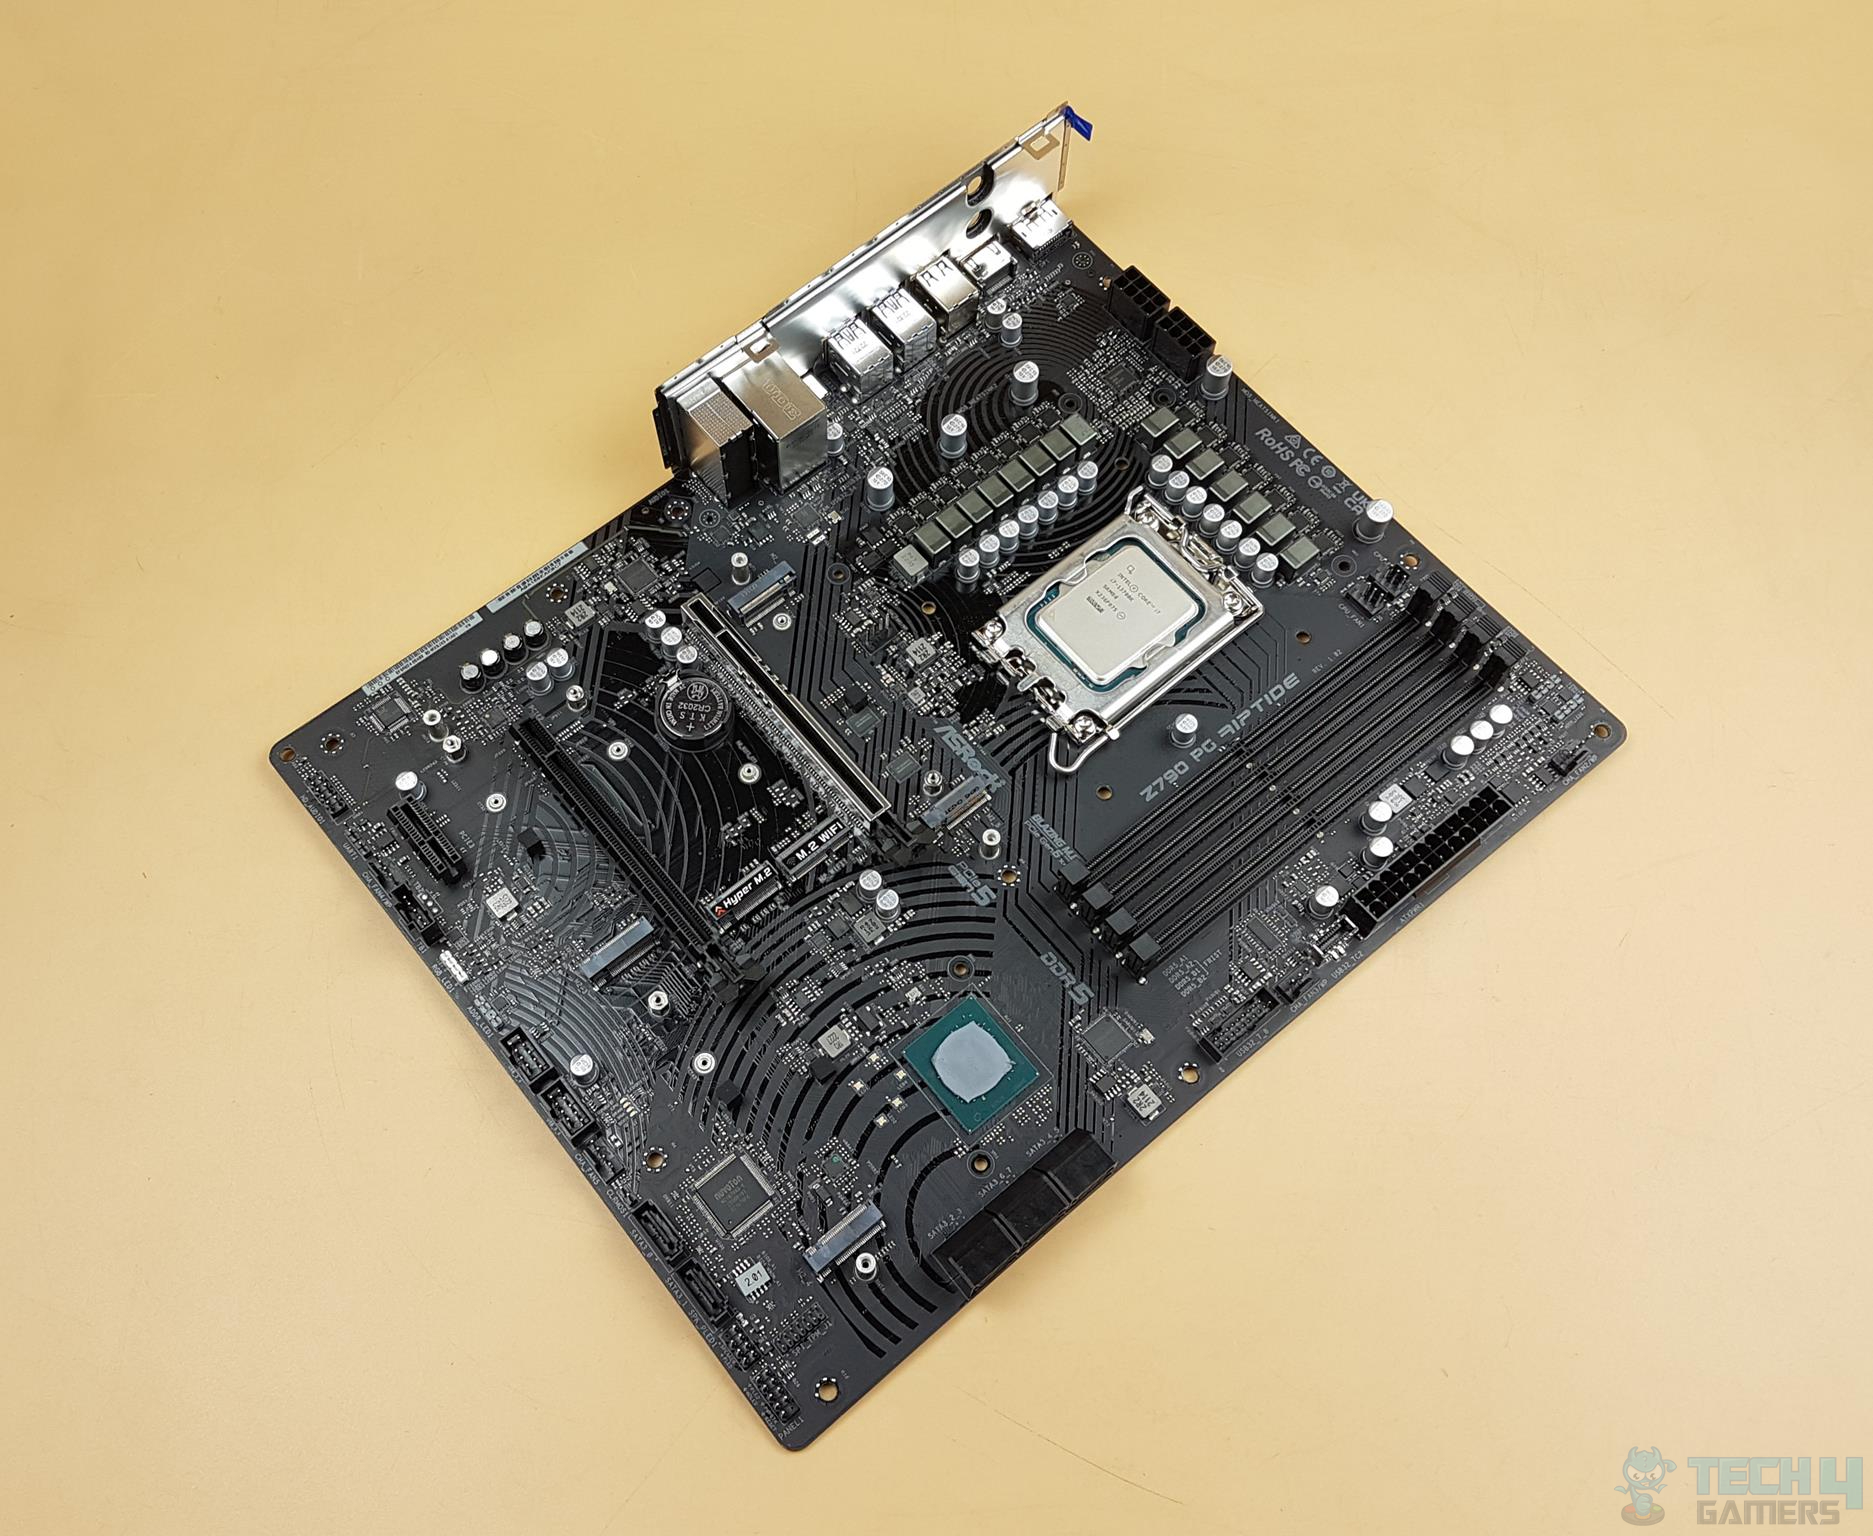 ASRock Z790 PG Riptide — The motherboard with all the heatsink covers removed